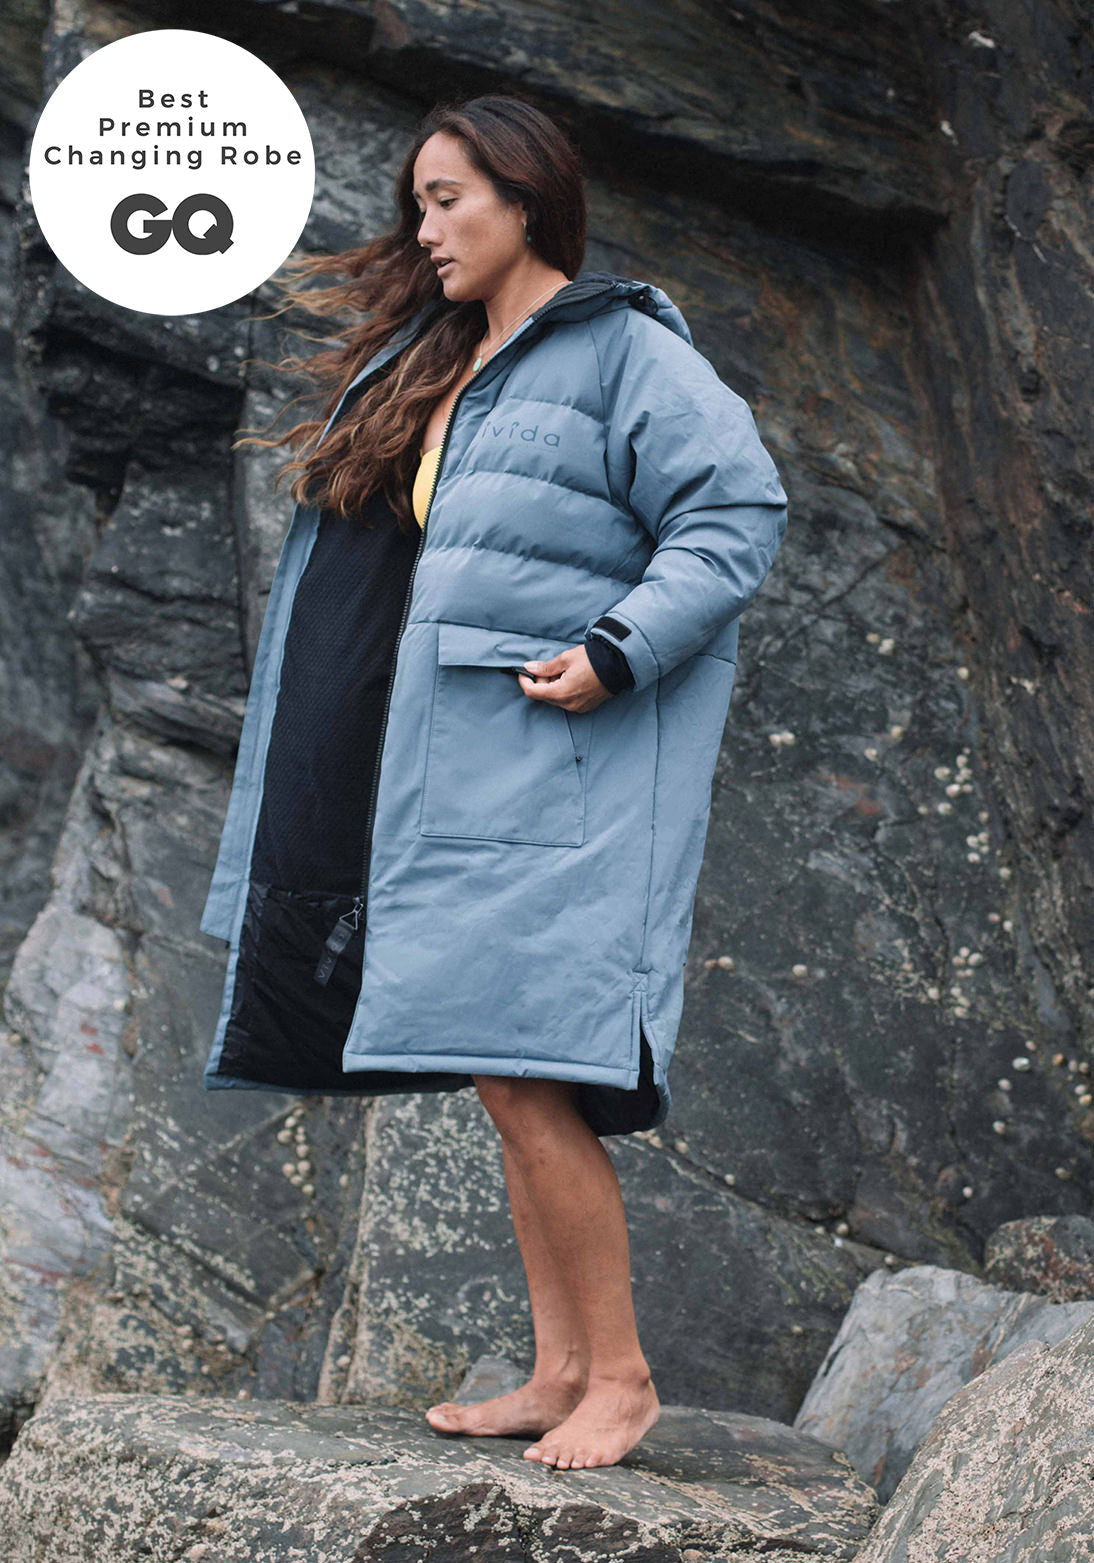 Woman wearing a Vivida Lifestyle All Weather Puffer Changing Robe, Mineral Blue Dry Robe for swimming standing on a rock. Sticker: Best Premium Changing Robe - GQ magazine.